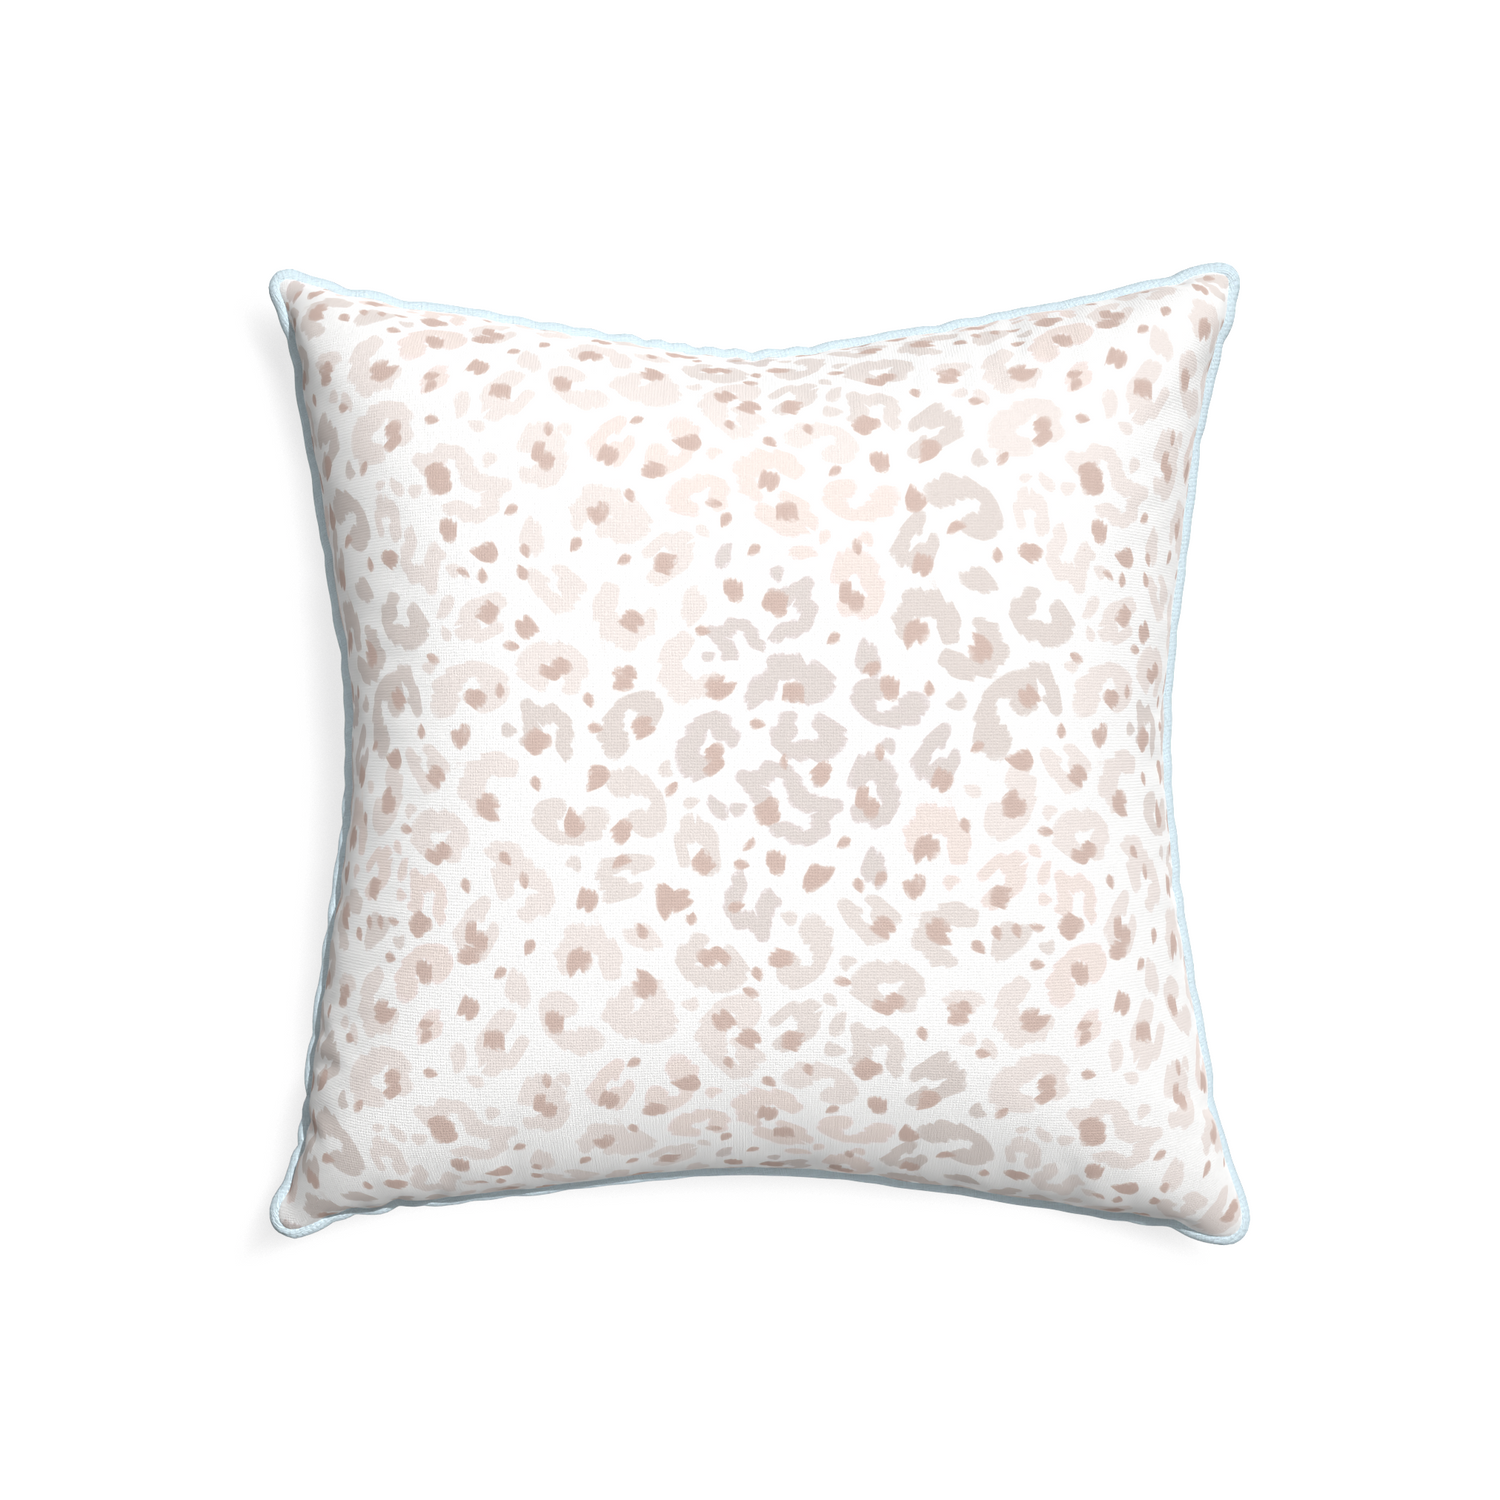 22-square rosie custom beige animal printpillow with powder piping on white background